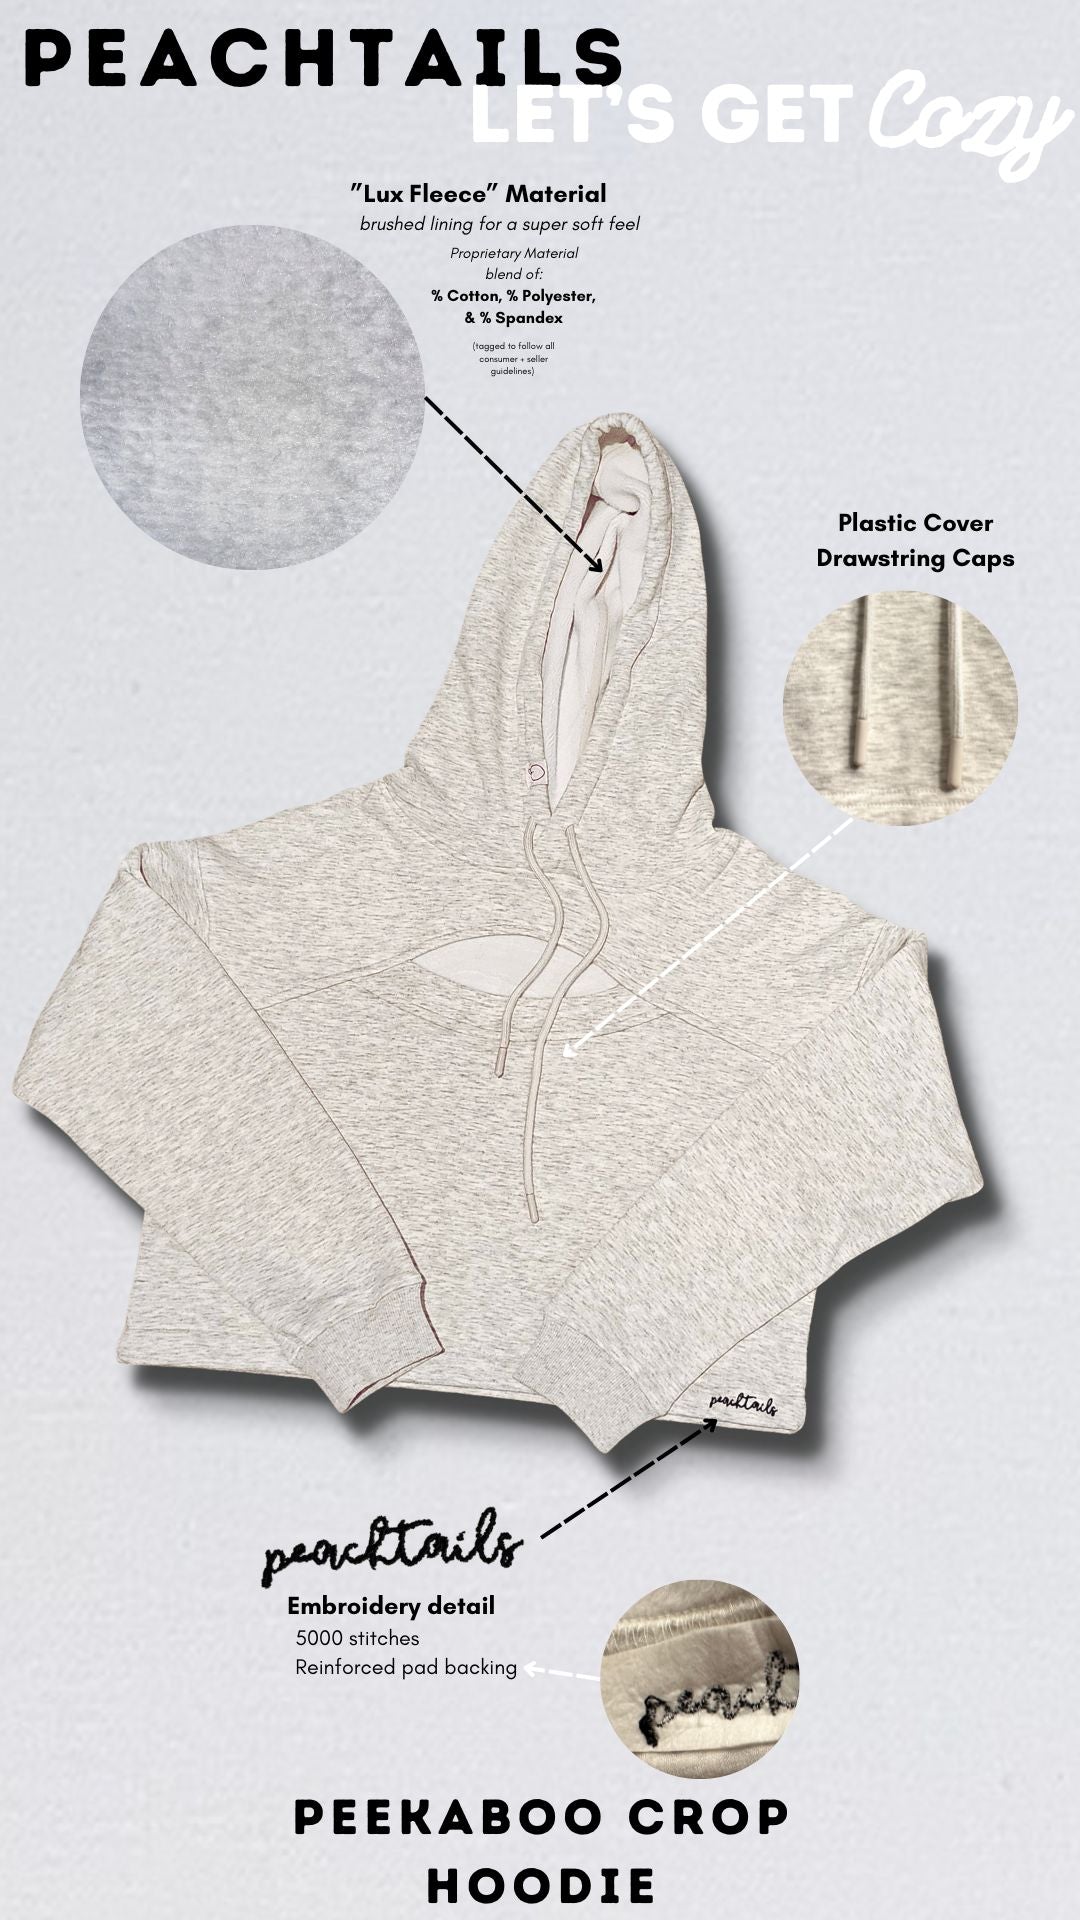 The image displays a Peachtails "Let's Get Cozy" ad for a peekaboo crop hoodie in heather grey. It highlights the "Lux Fleece" material, plastic cover drawstring caps, and an embroidered detail with 500 stitches and reinforced back pocking on the left sleeve.